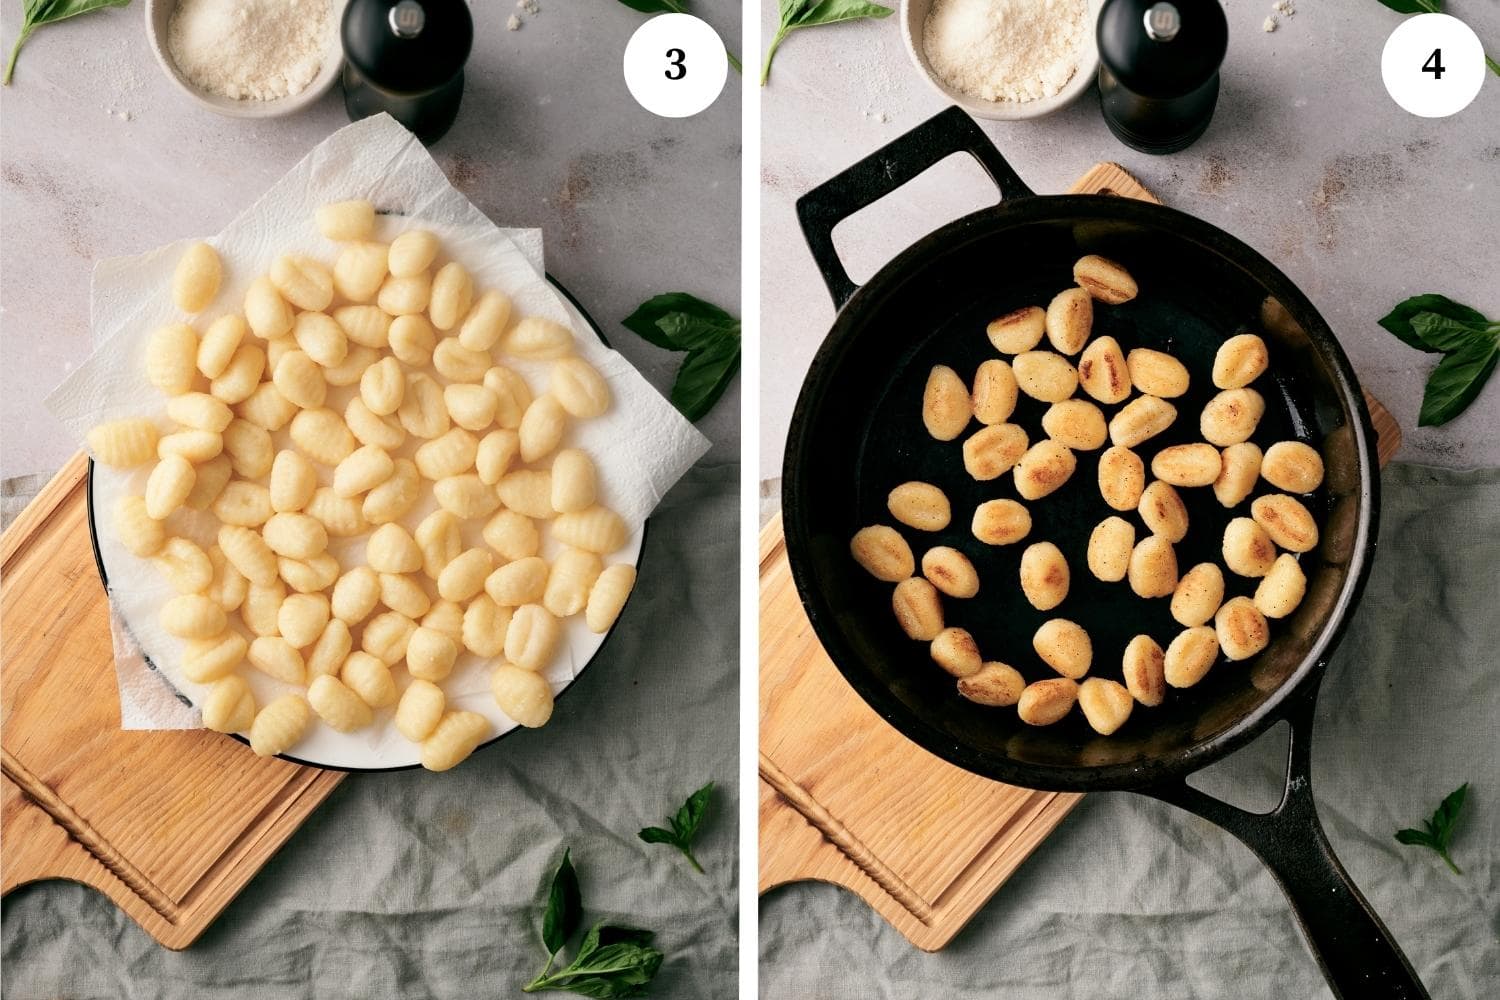 gnocchi on a plate with paper towels. pan-fried gnocchi on a skillet